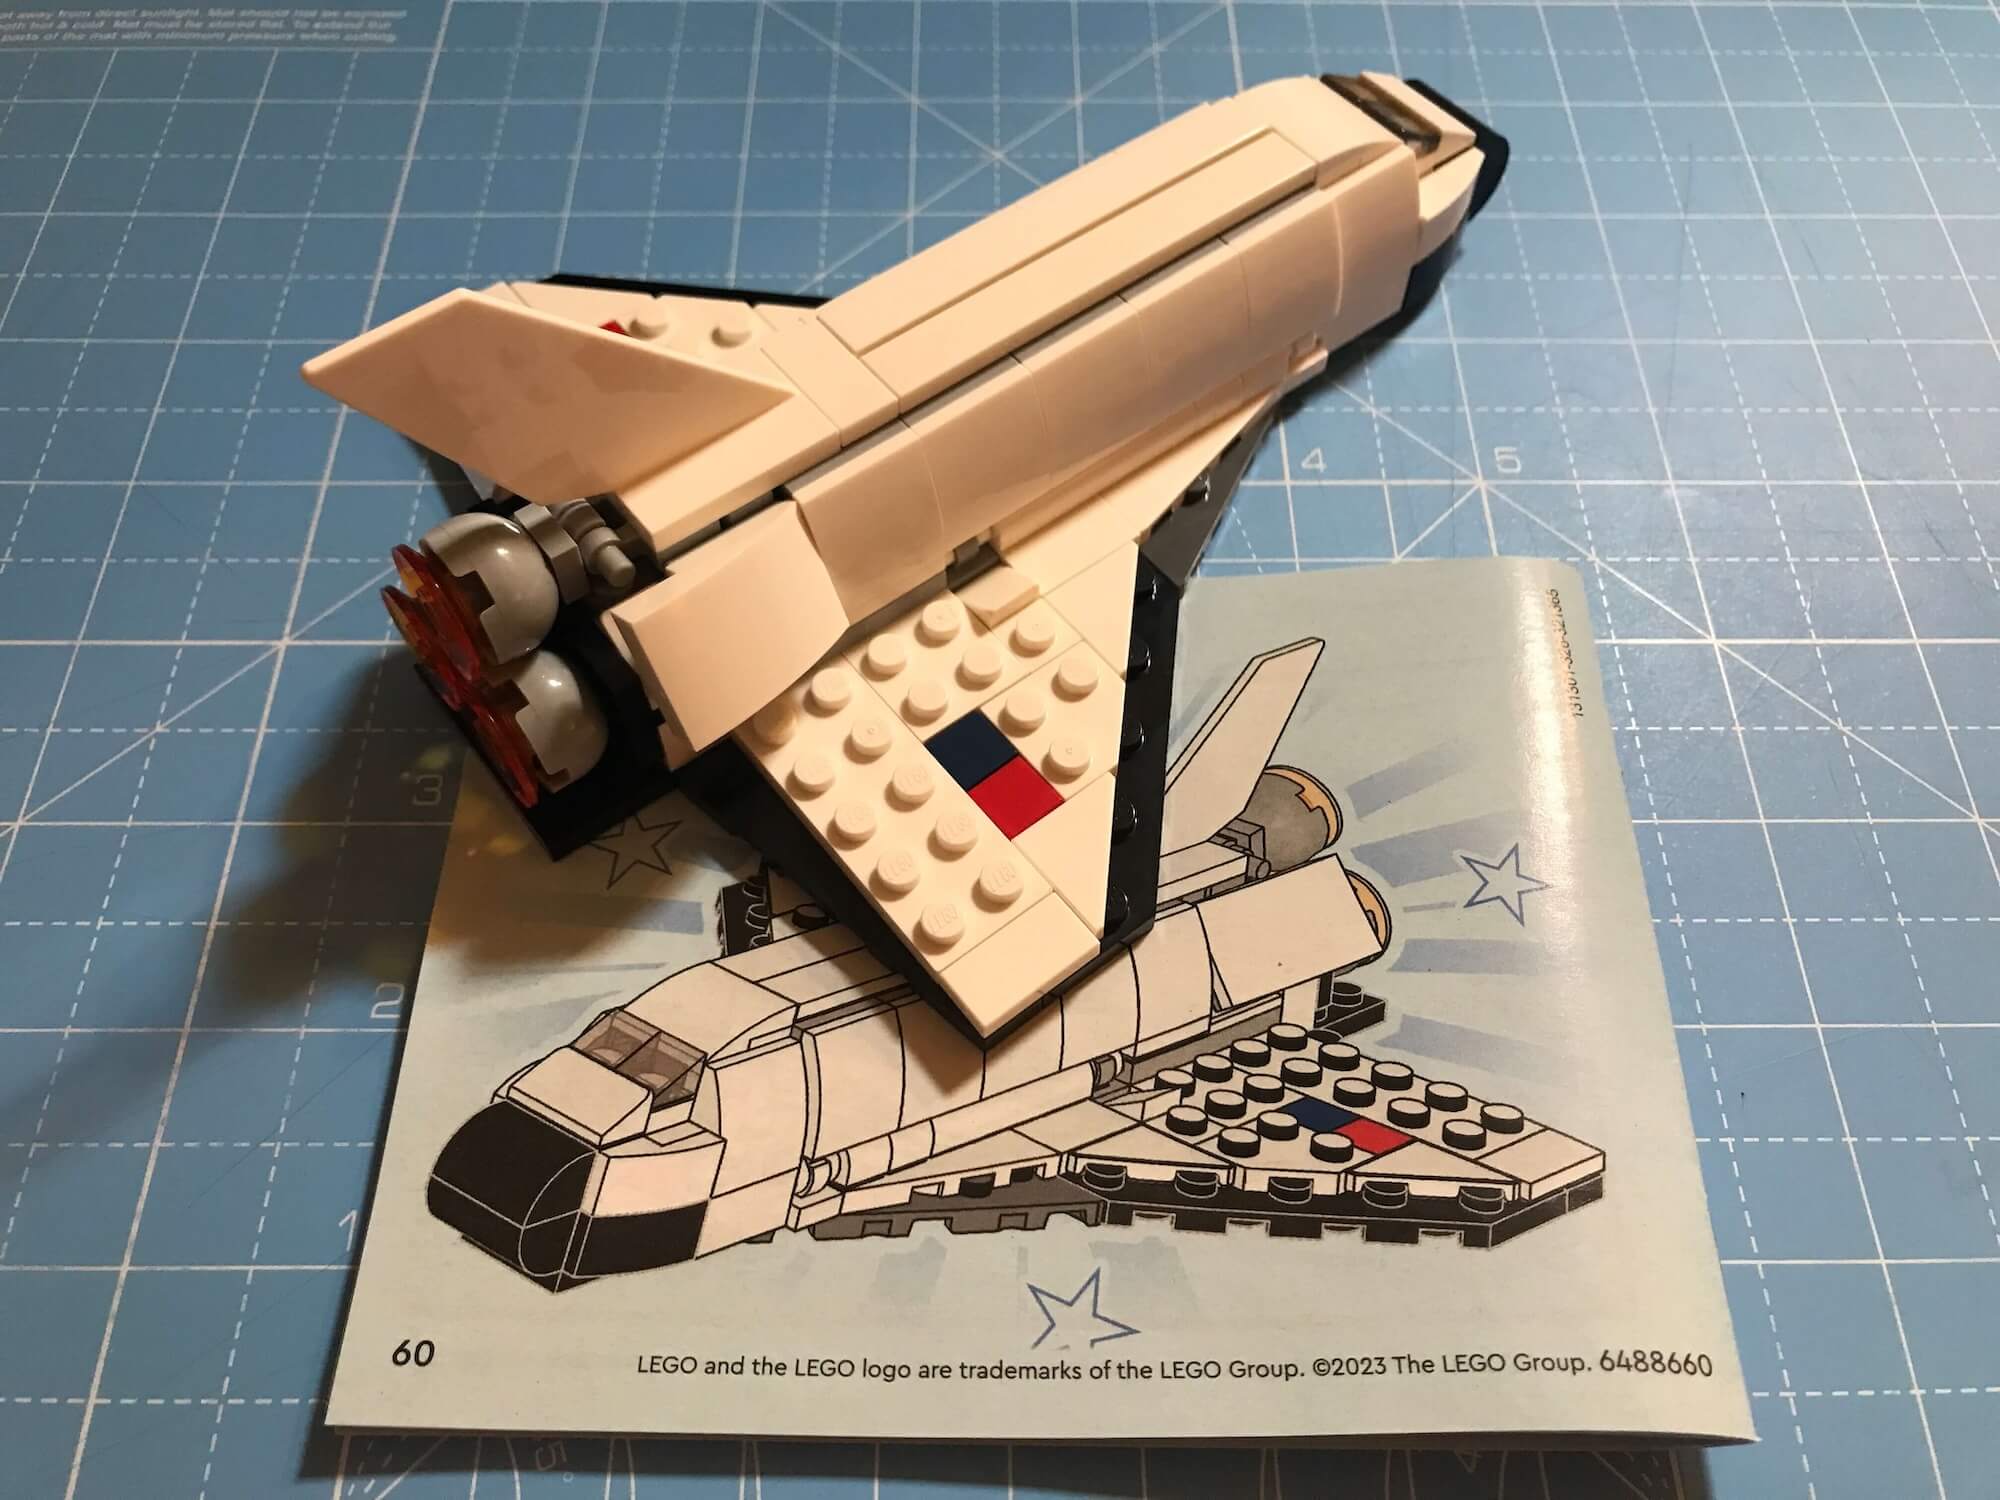 Completed Shuttle on the project mat with the instruction book.